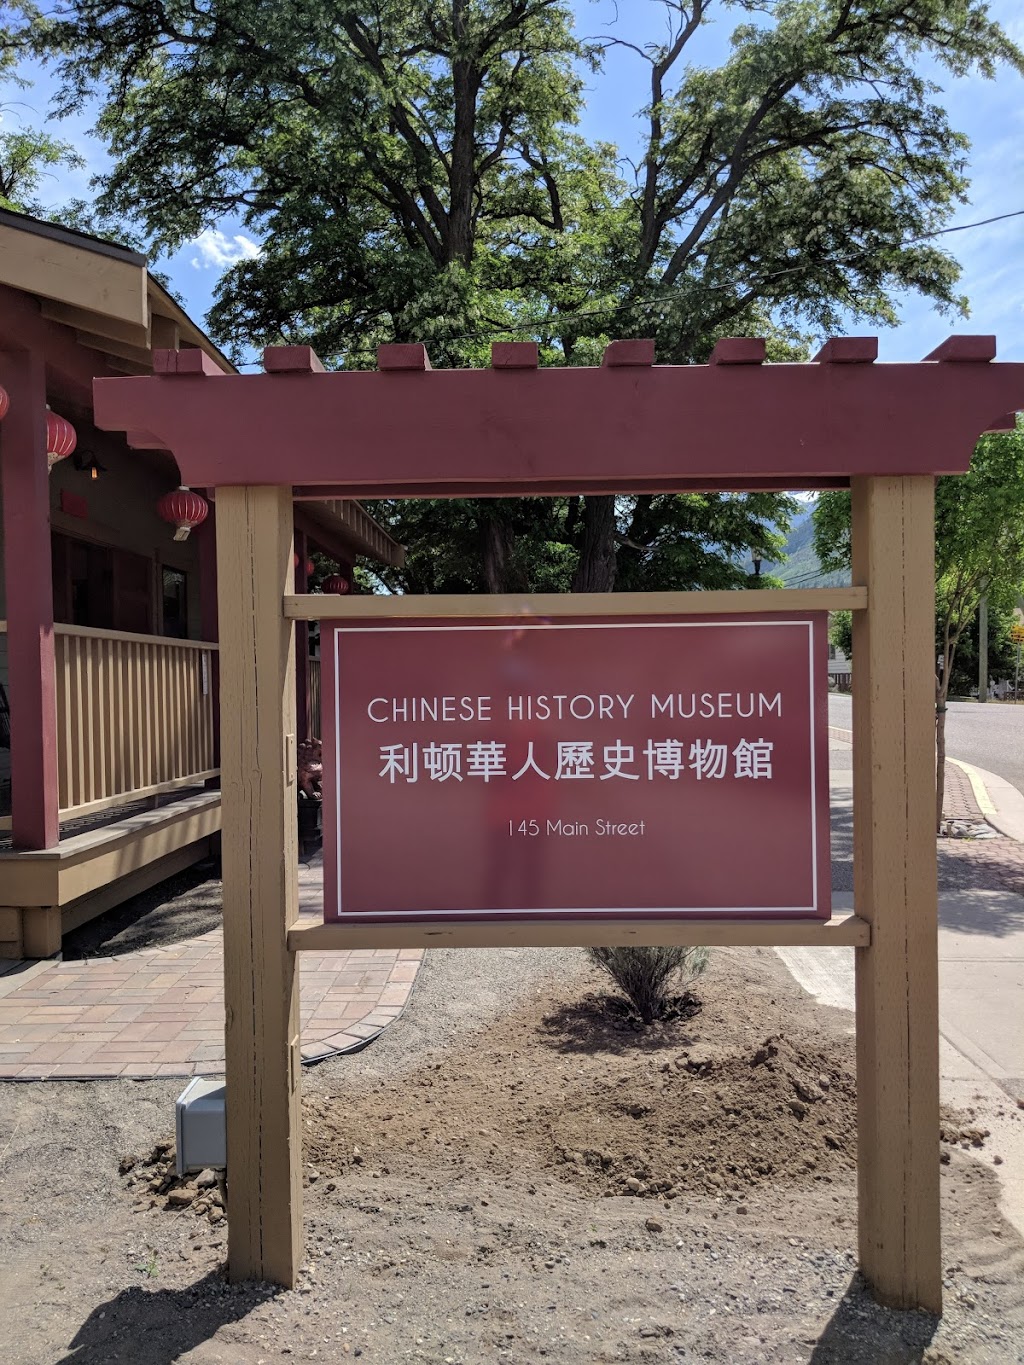 Lytton Chinese History Museum | museum | 145 Main St, Lytton, BC V0K 1Z0, Canada | 7782546667 OR +1 778-254-6667